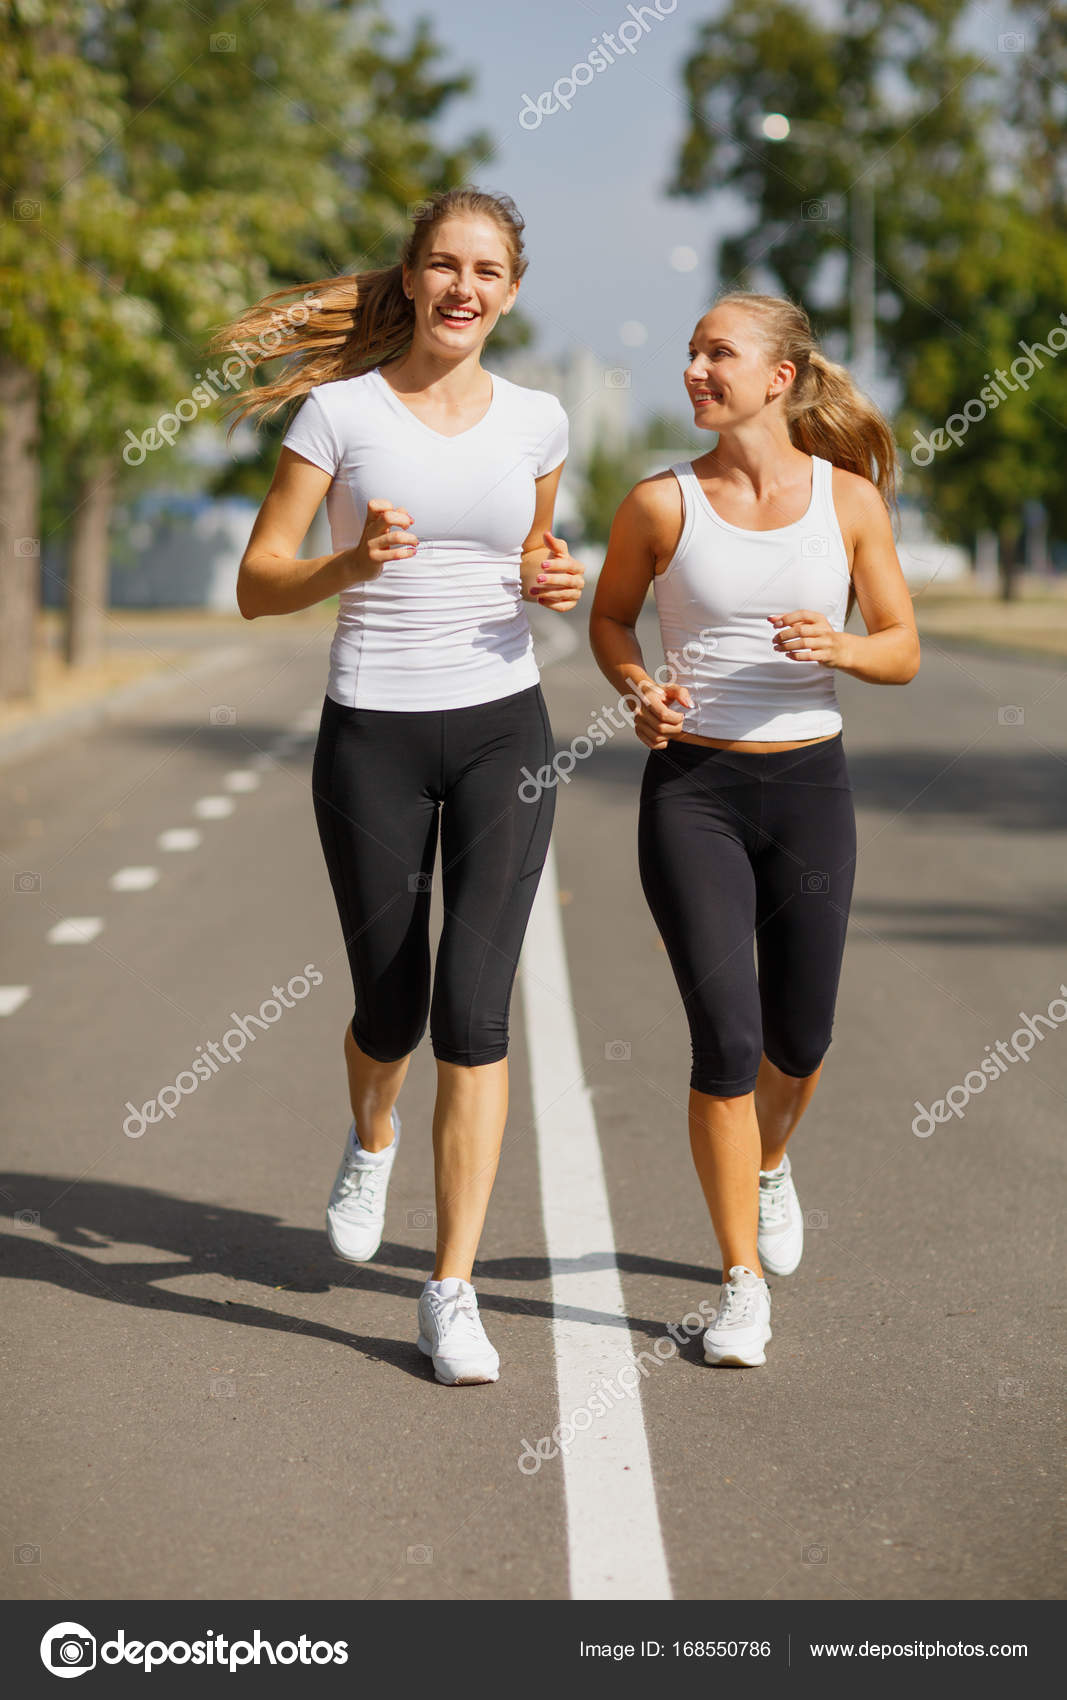 Gorgeous girls running on the blurred background. Sporty youth